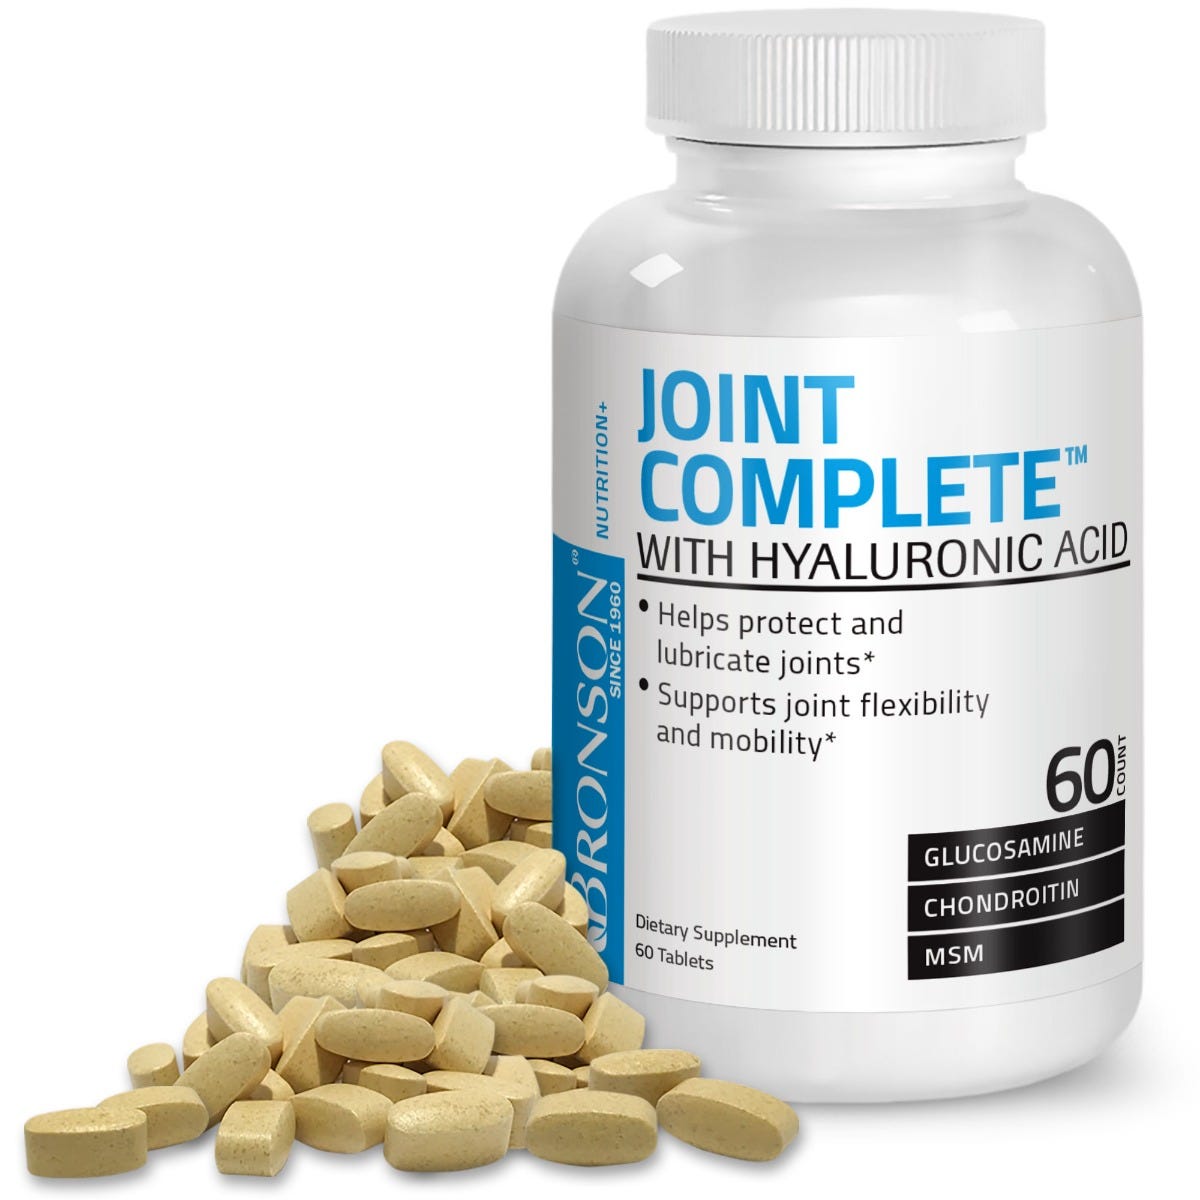 Joint Complete Formula with Hyaluronic Acid view 4 of 7